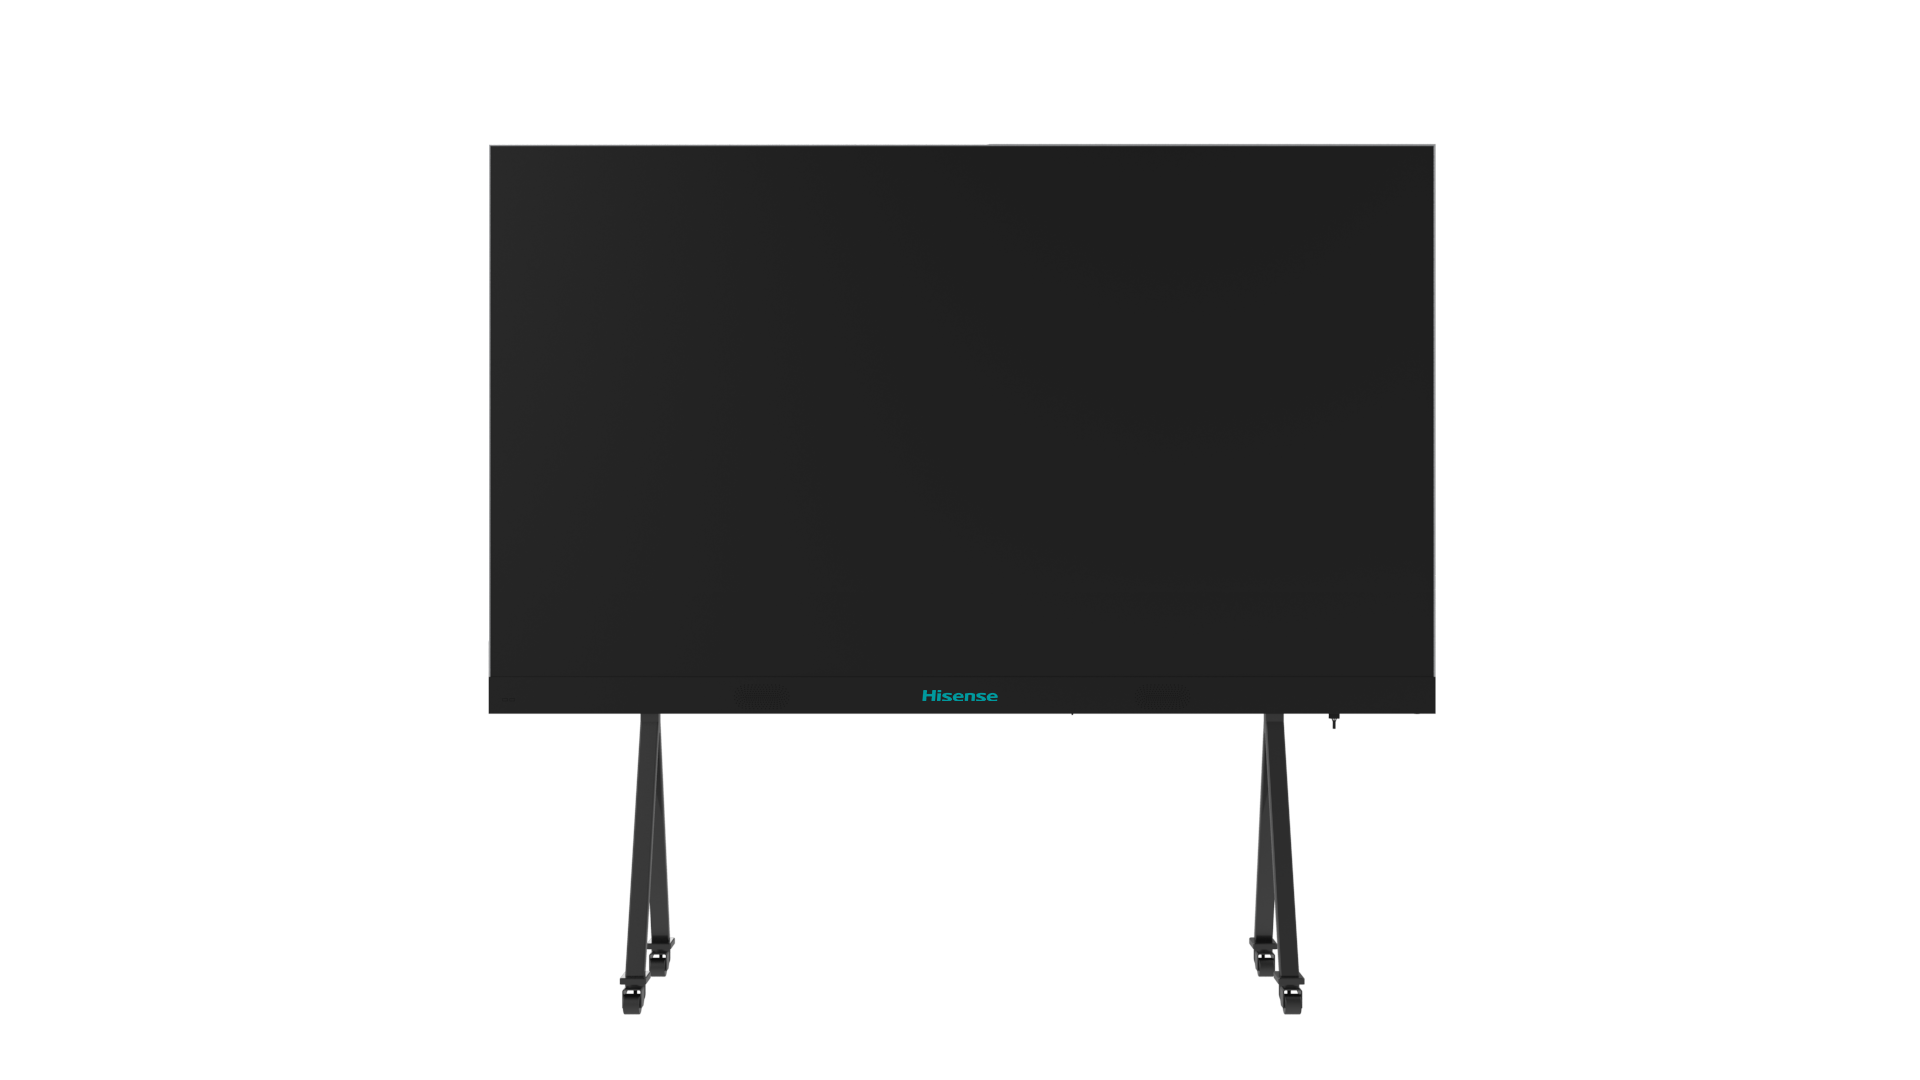 Hisense HAIO138 LED All in One Display - 138 inch - 1.59 mm PP - 500 cd/m² - Full-HD - 1920 x 1080 - LED display - with wall mount